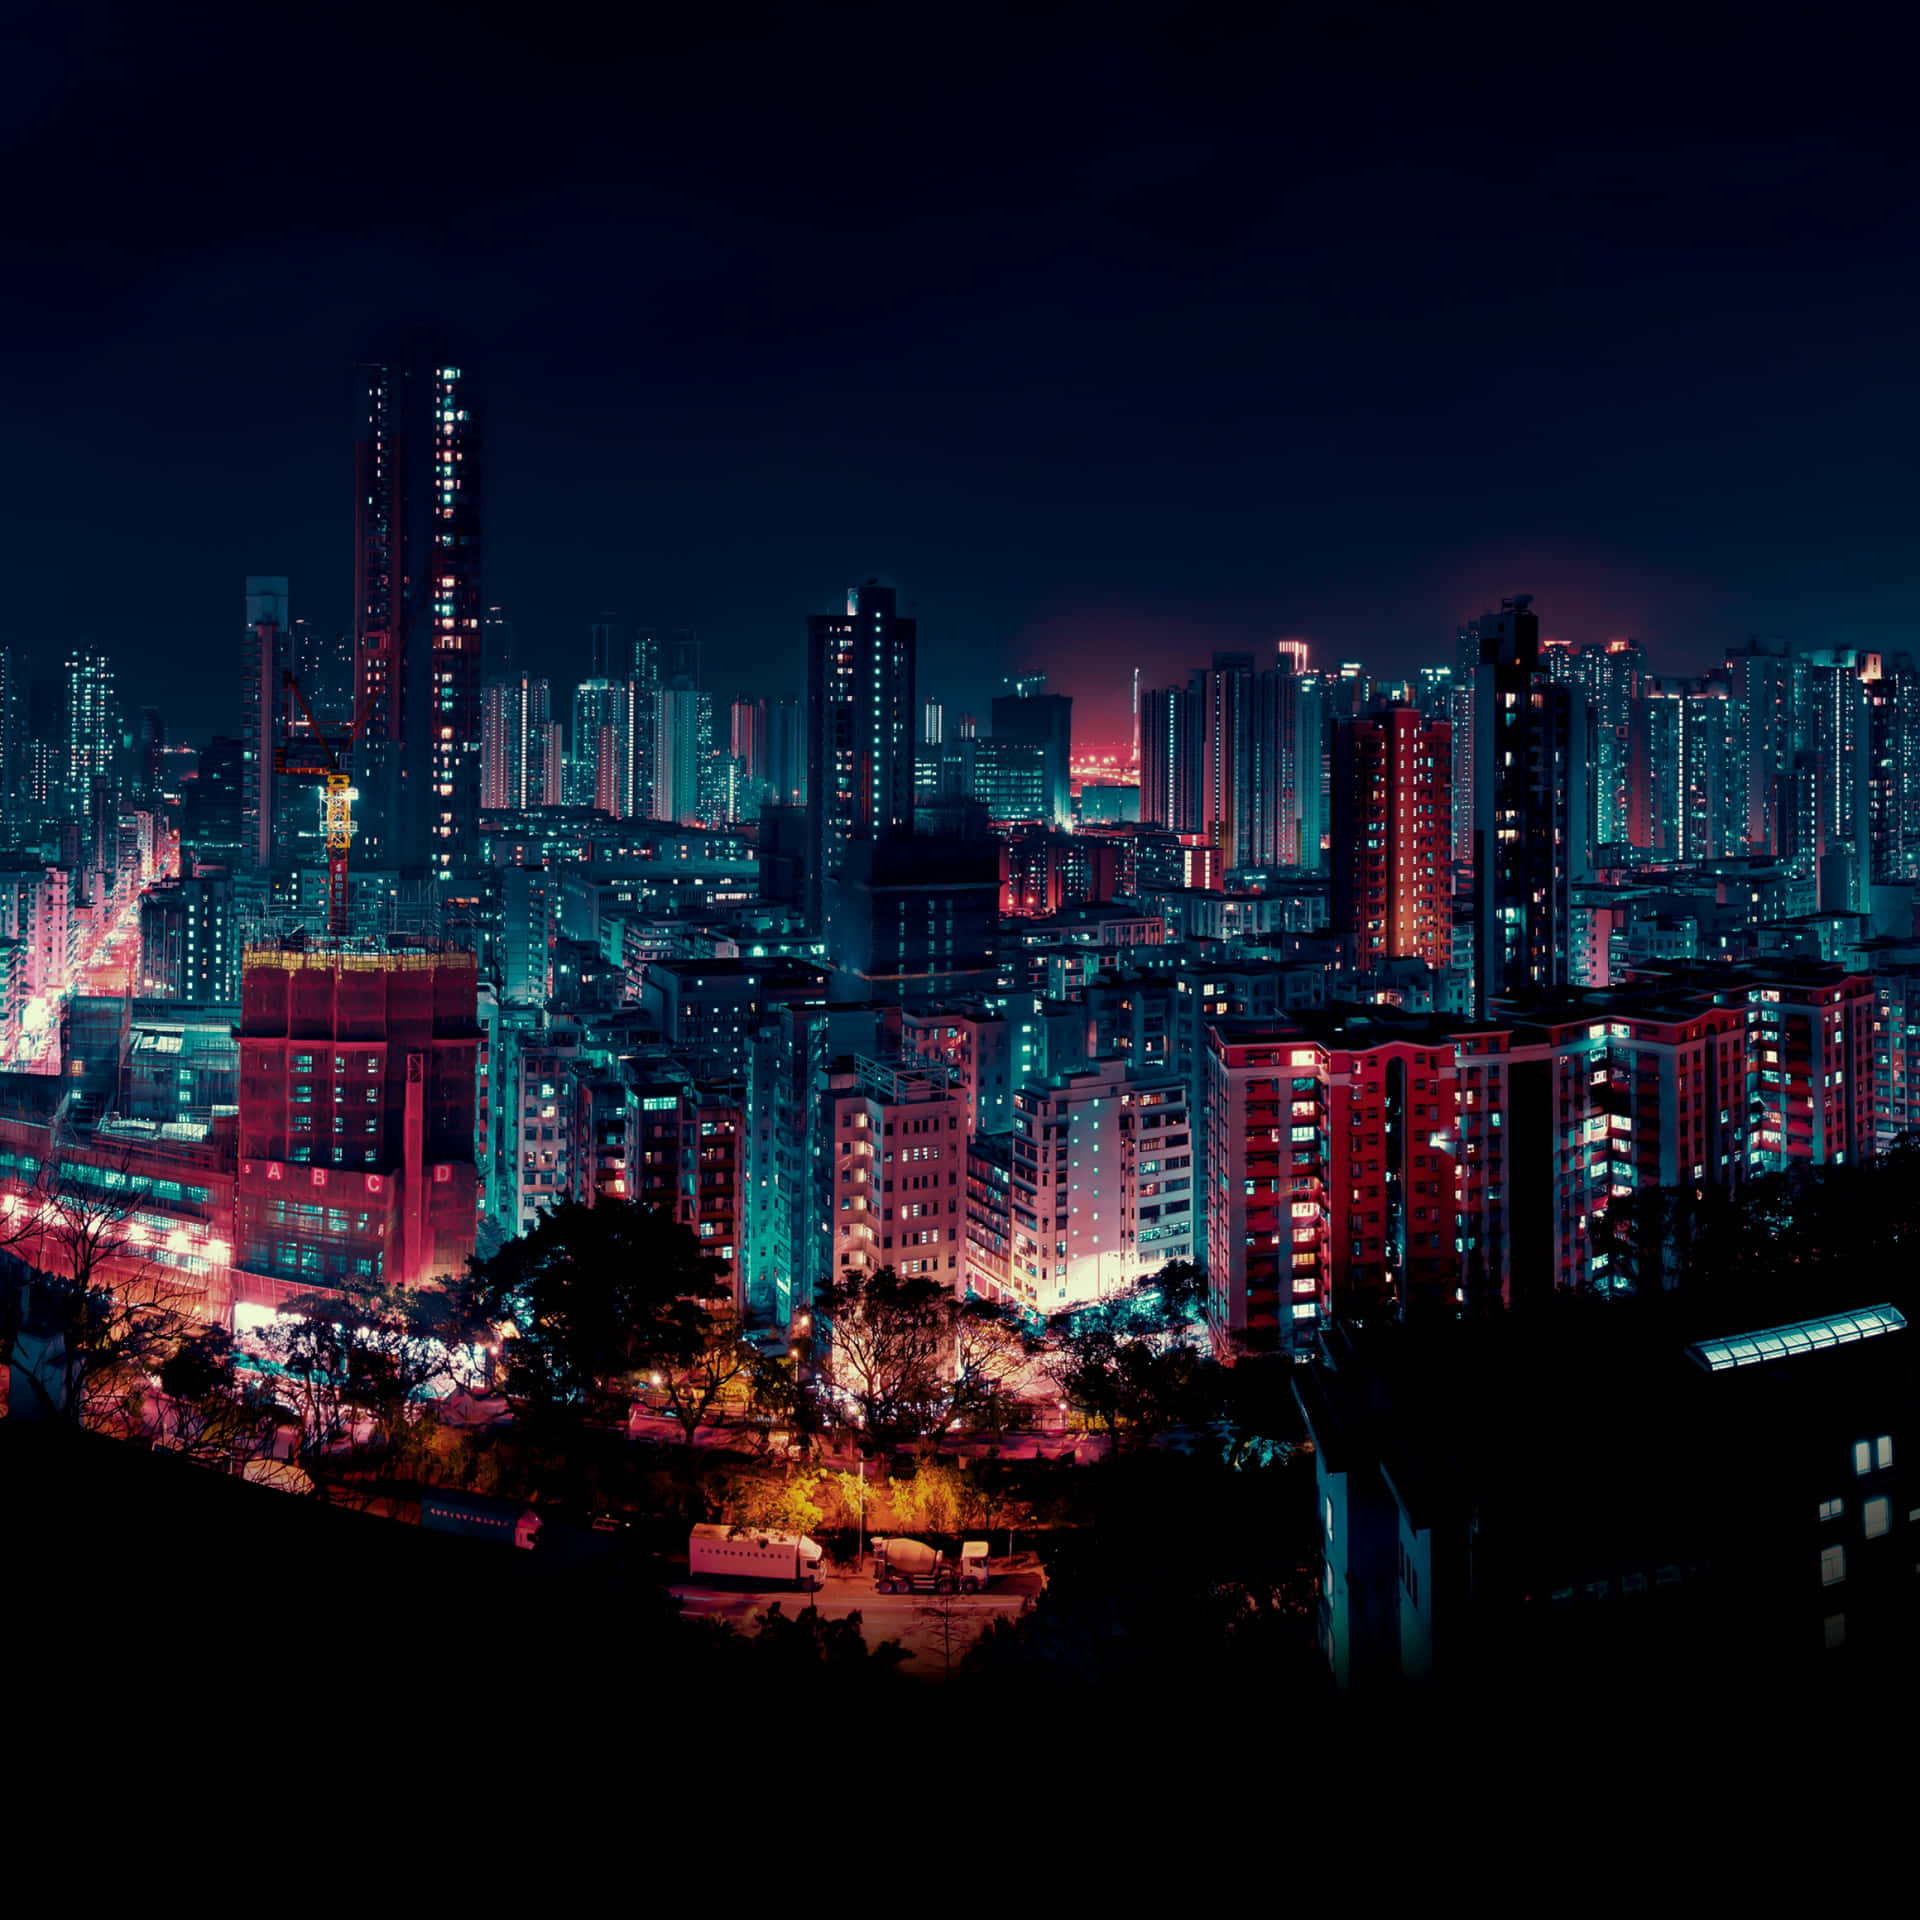 The beauty of this amazing cityscape at night